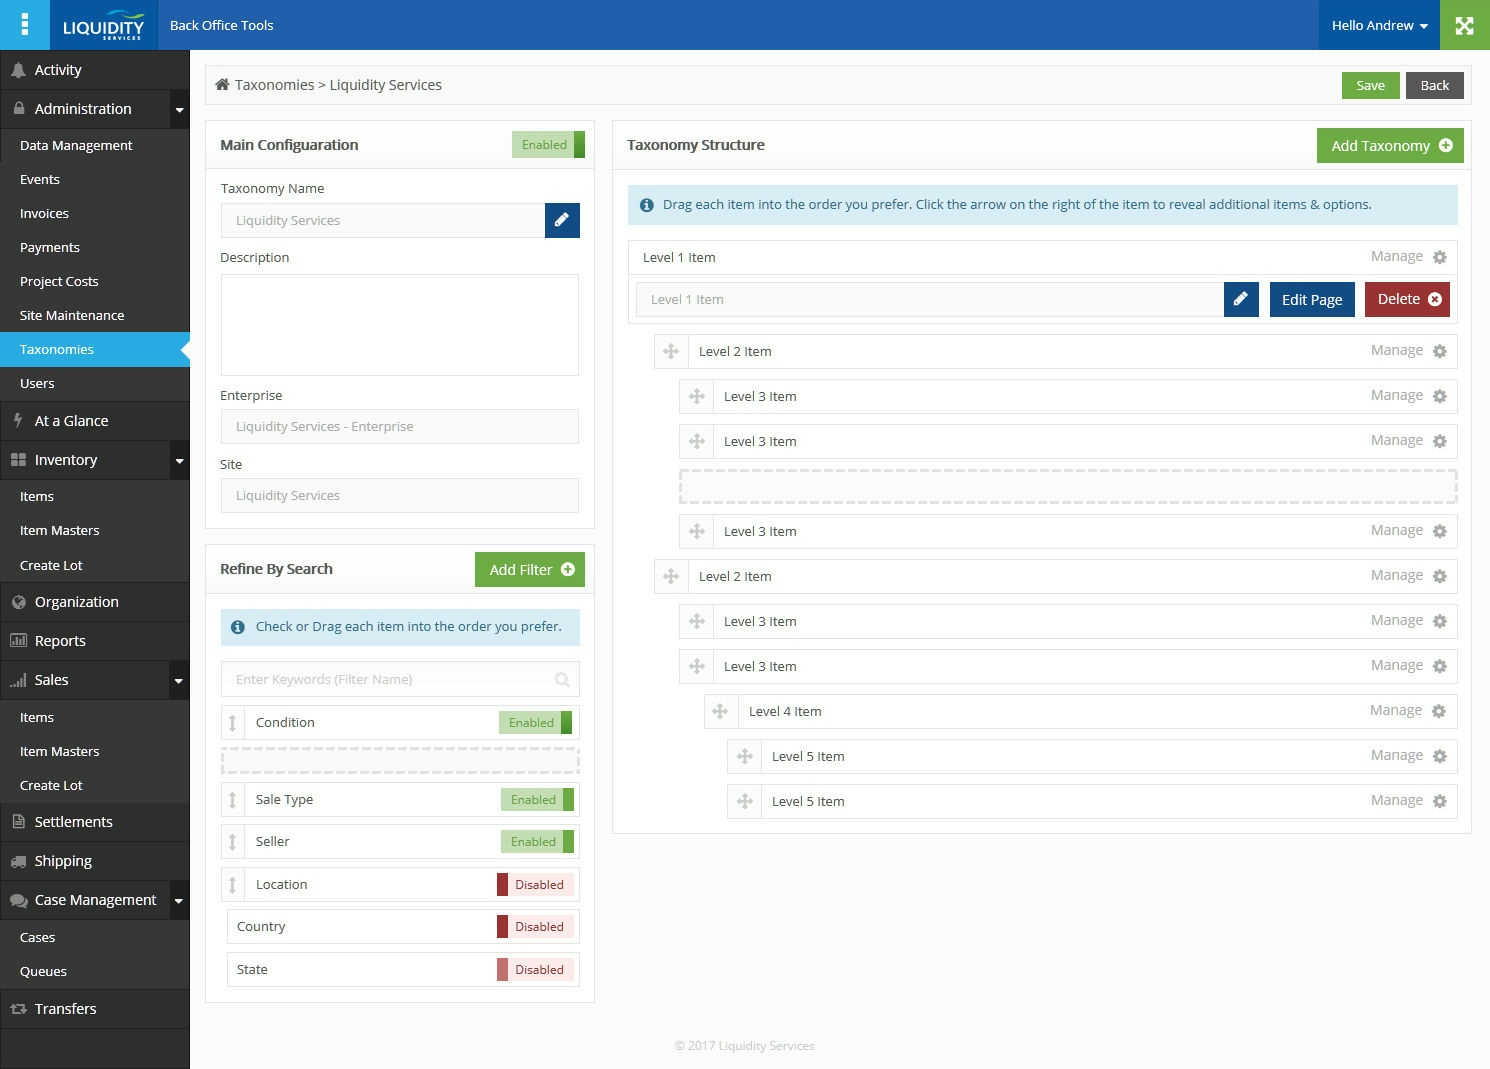 Screenshot of the back office tools for the Liquidity Services admin dashboard, showcasing the multi-marketplace functionality and taxonomies management capabilities for efficient administration and organization of the online marketplace.